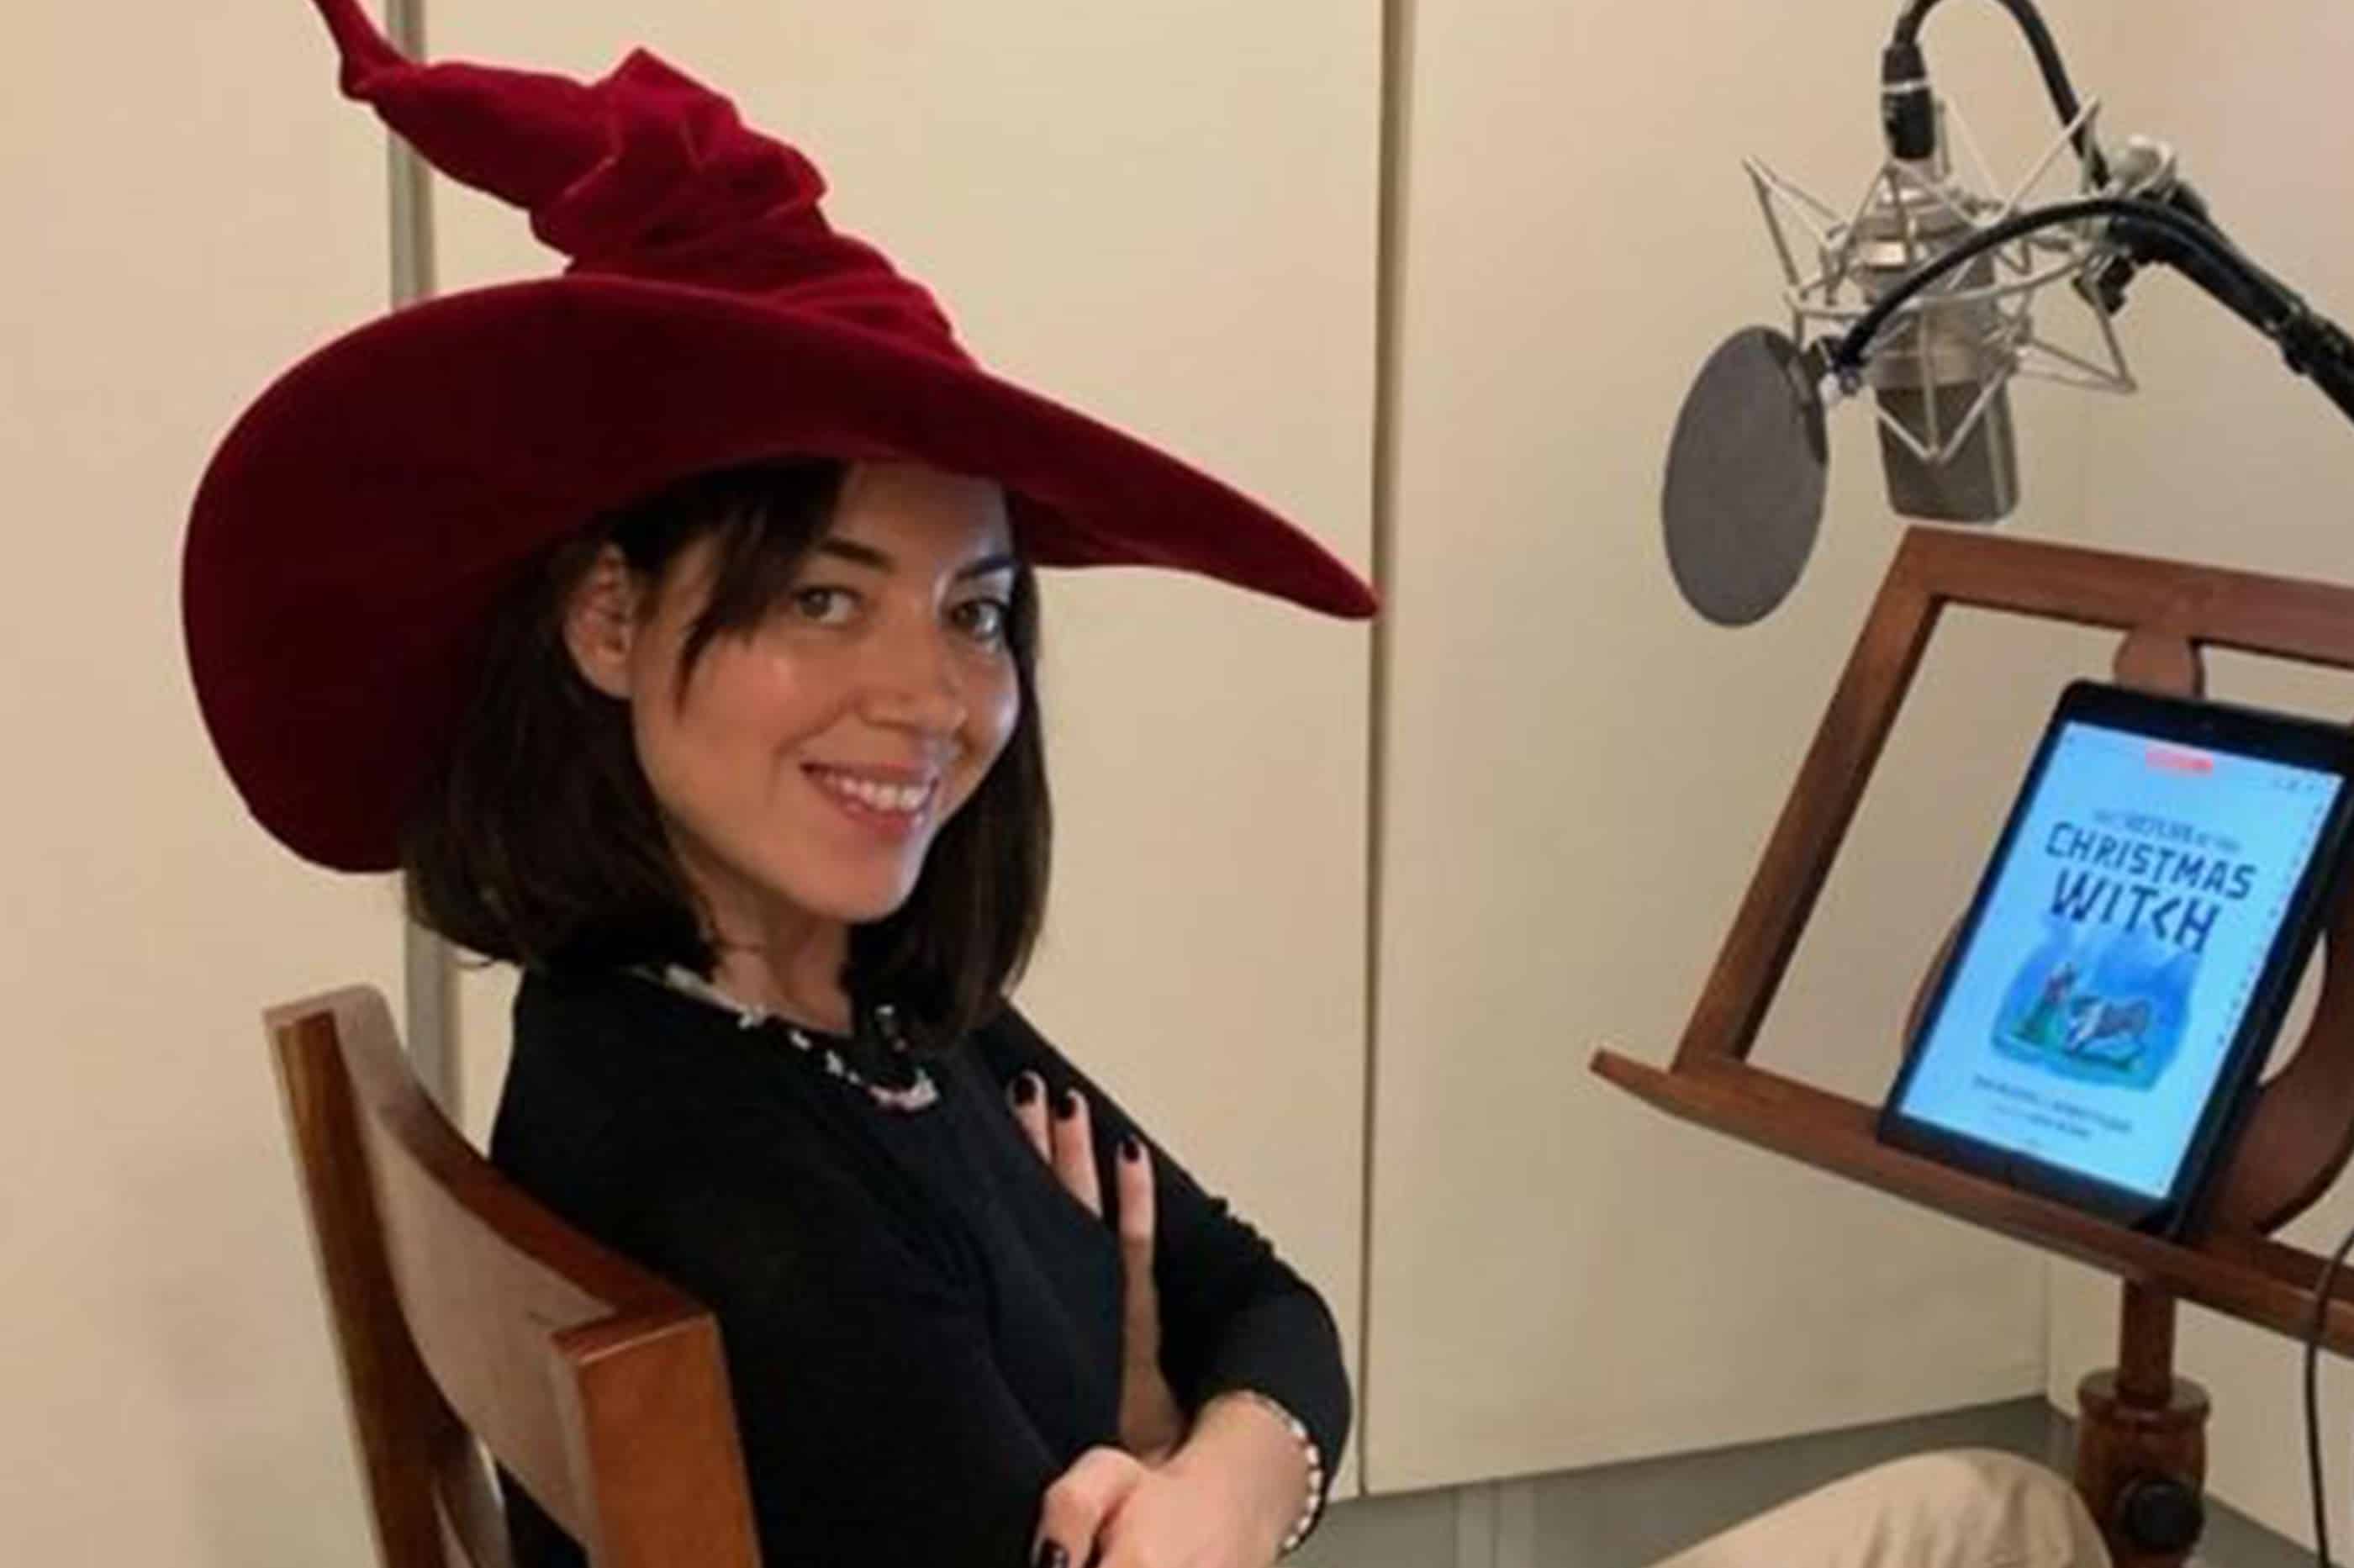 Aubrey Plaza Wants to Be the 'Female Tim Burton' with Next Project